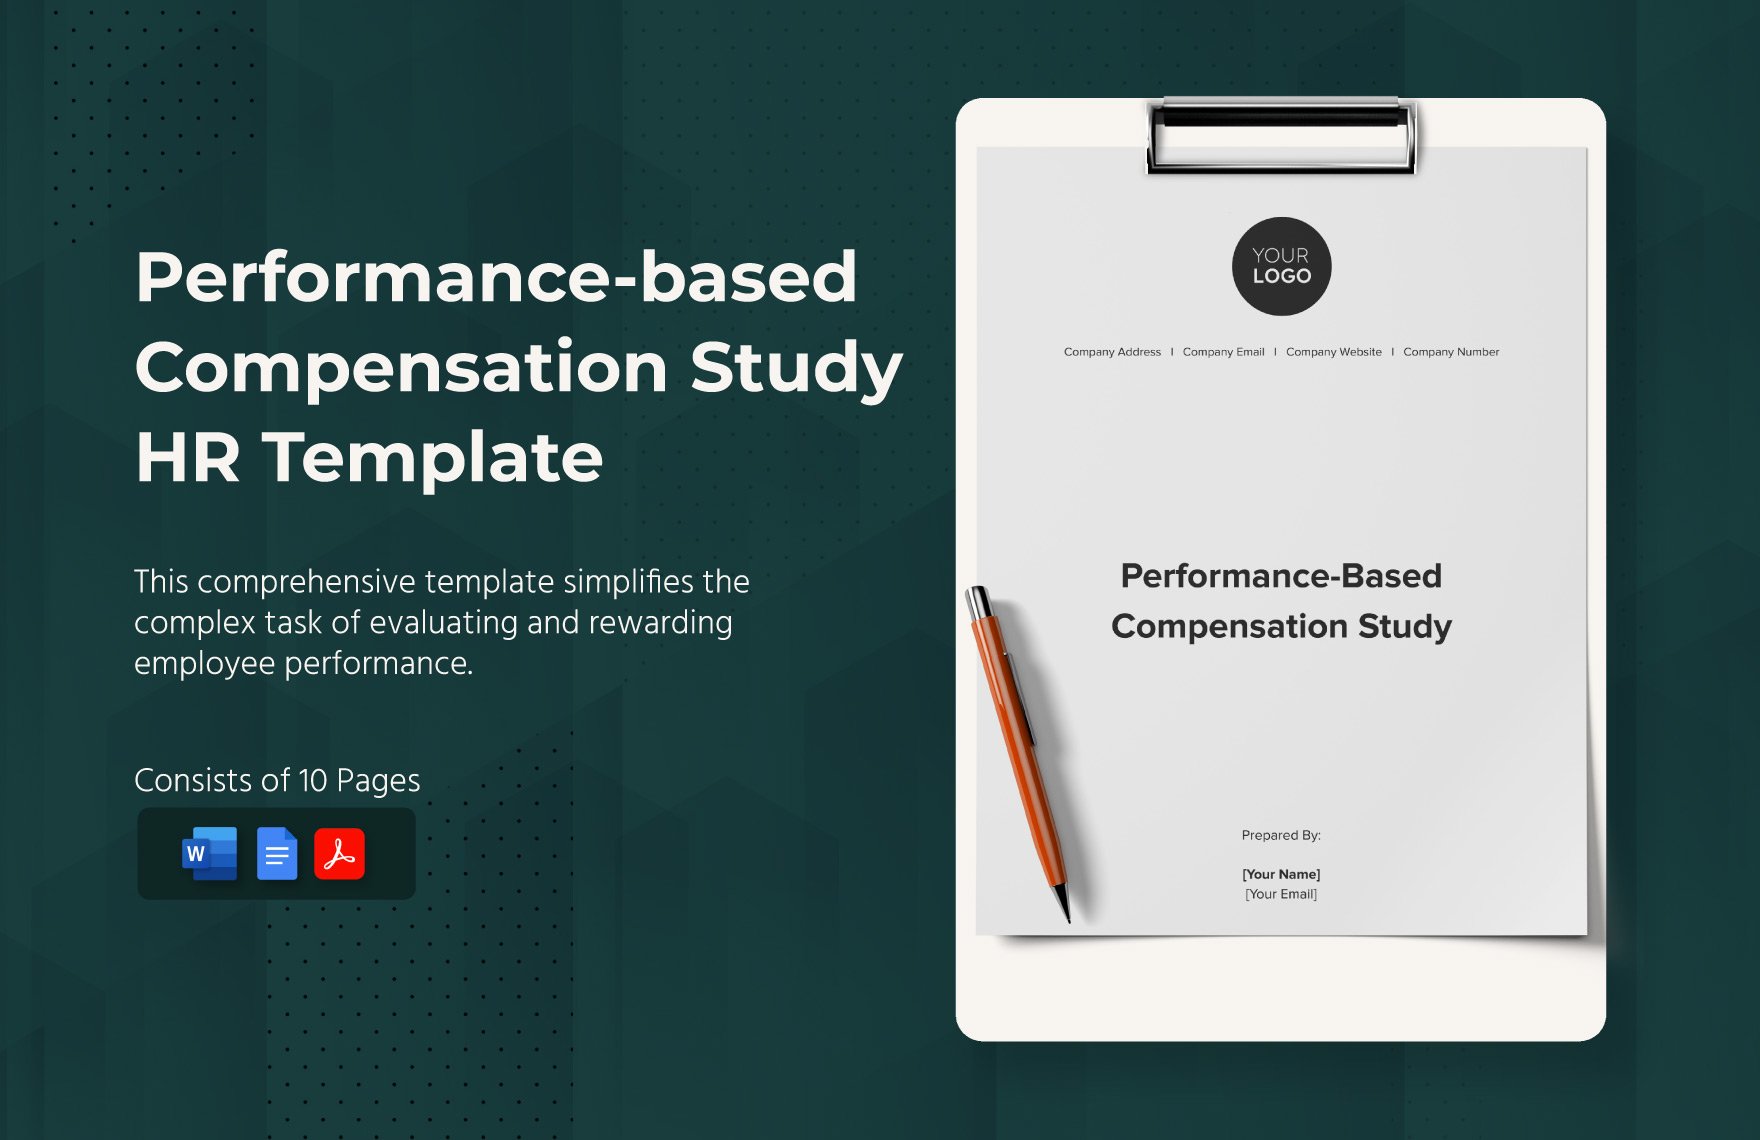 Performance-based Compensation Study HR Template